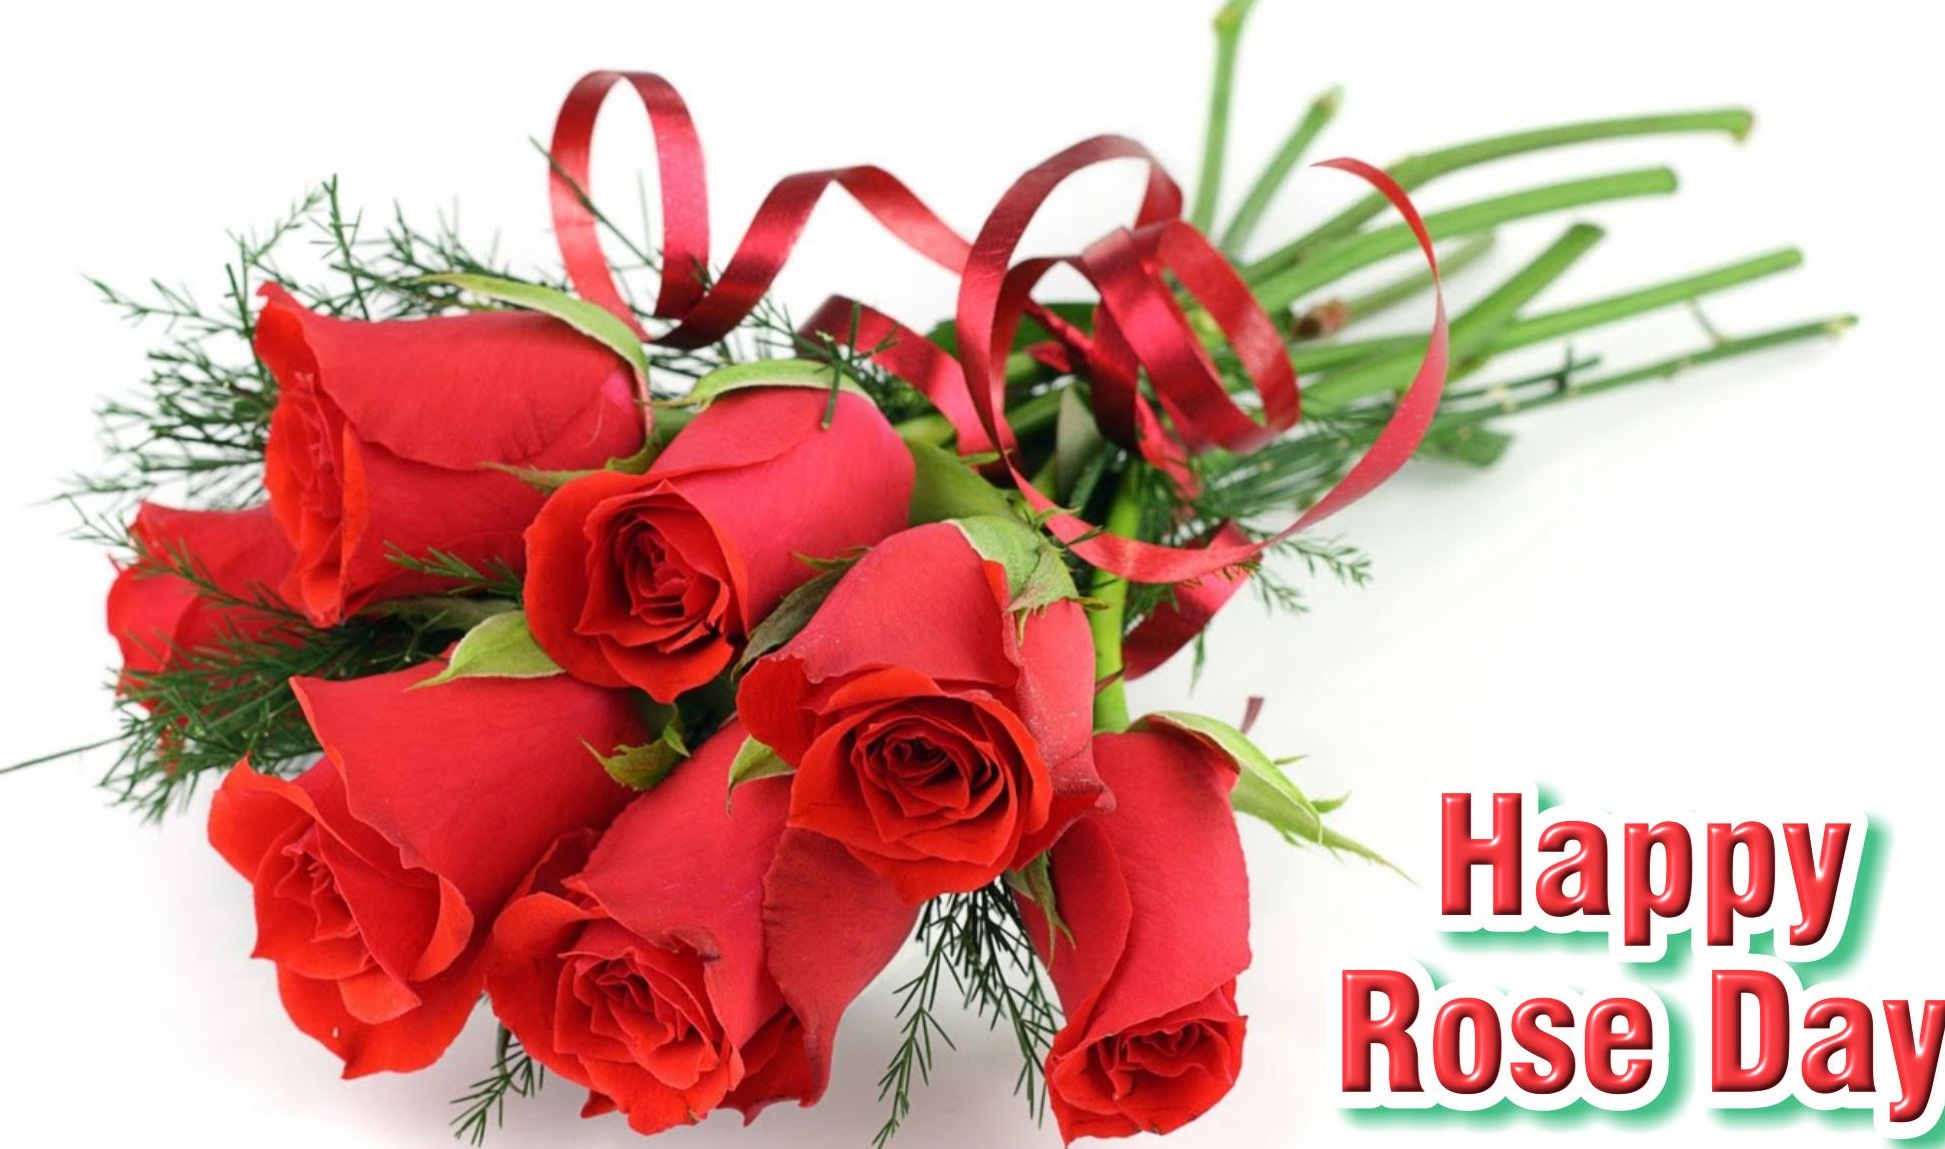 Valentines Day - Rose Day Wishes, Quotes, SMS and Messages